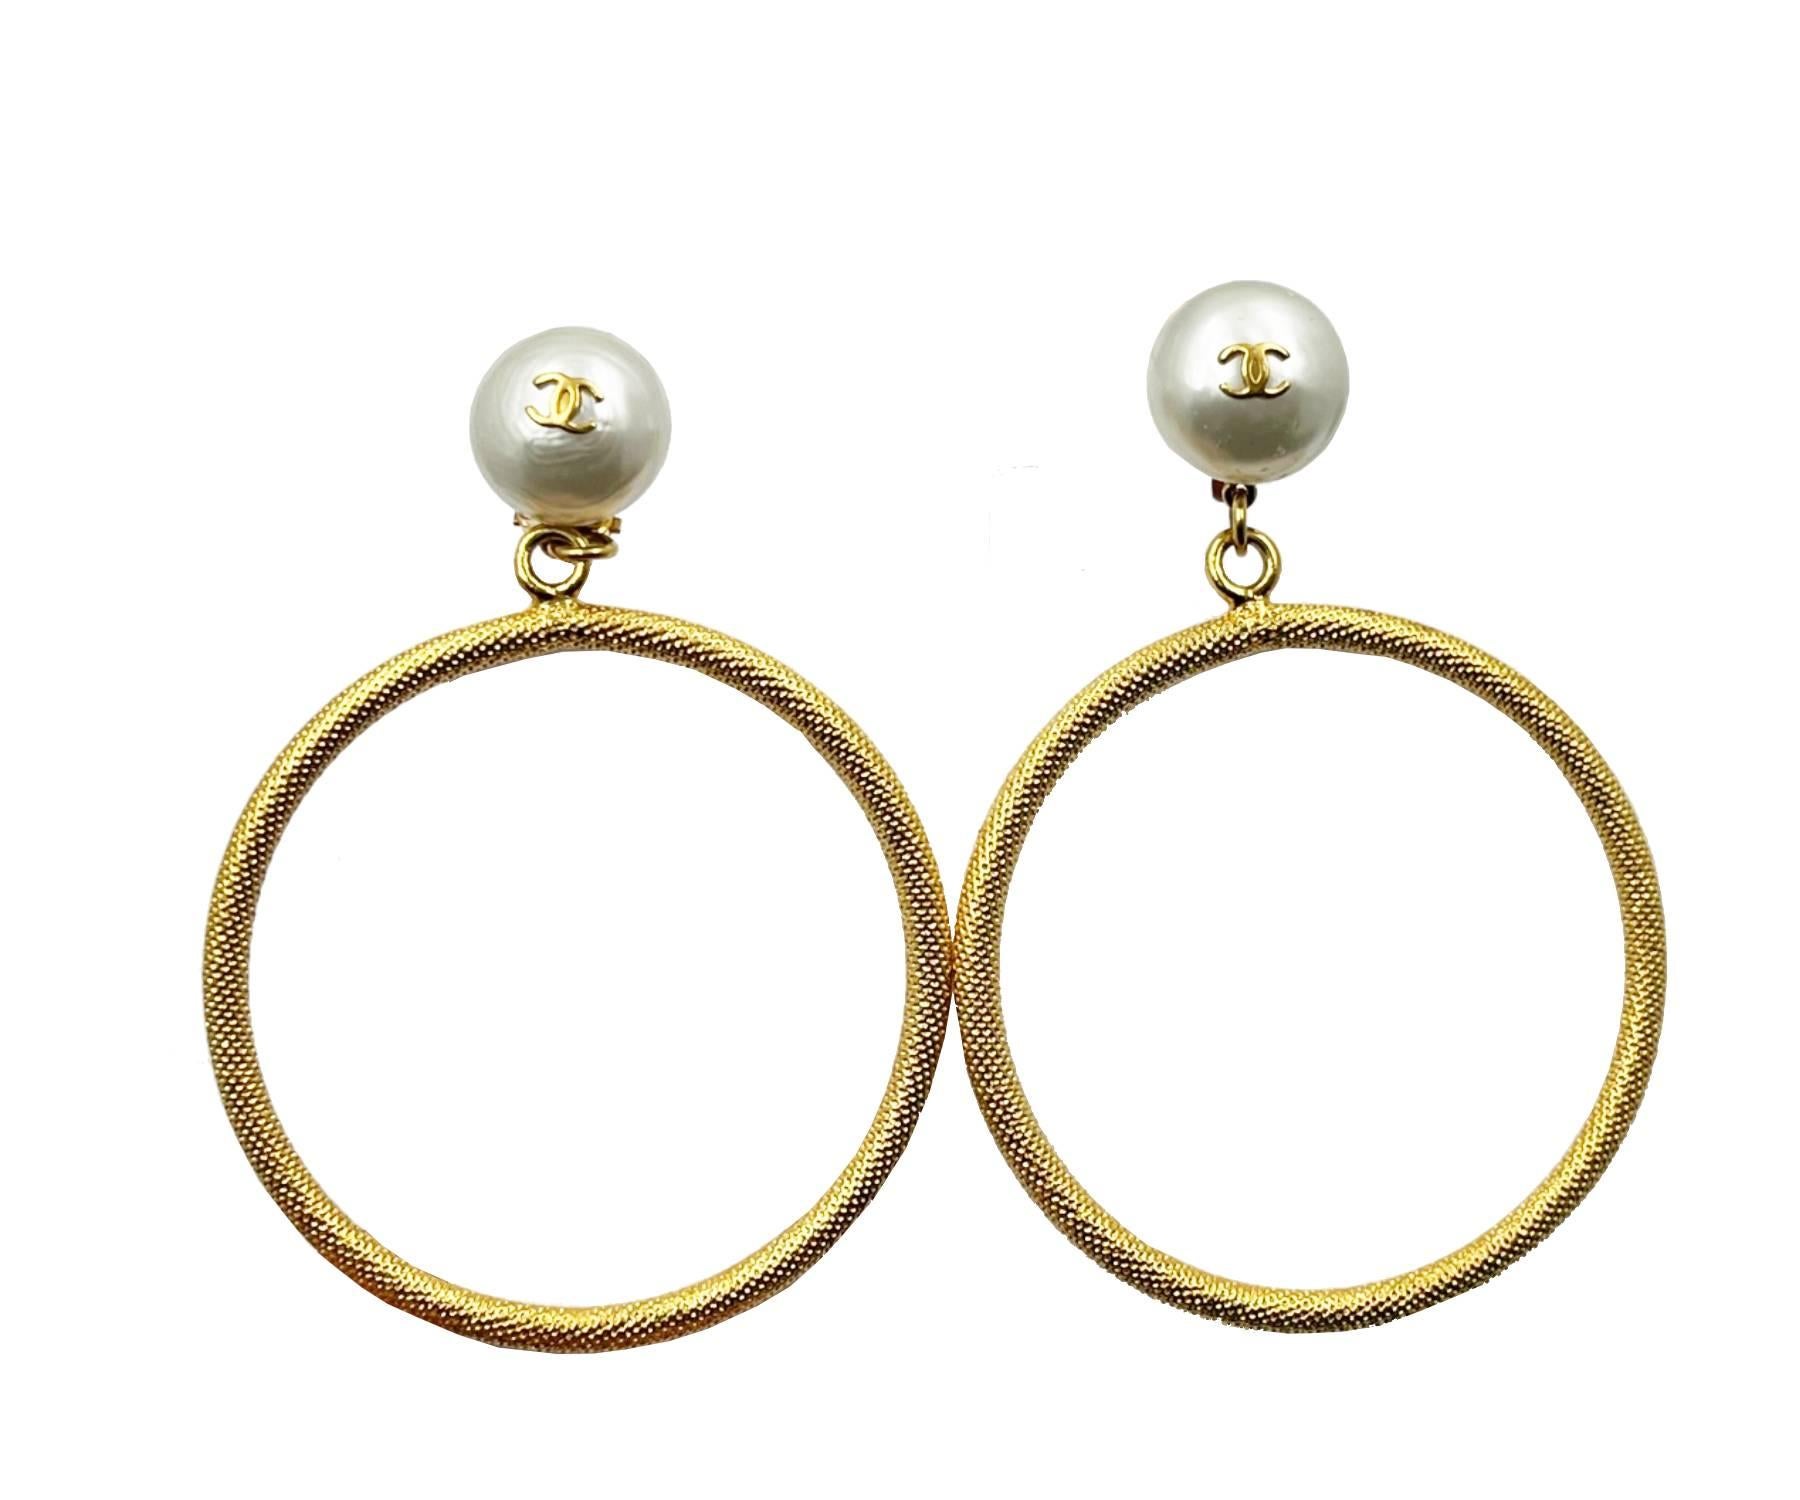 Chanel Vintage Rare Gold Plated CC Pearl Large Hoop Dangle Clip on LargeEarrings

*Marked 96
*Made in France
* Comes with the original box

-It is approximately 3